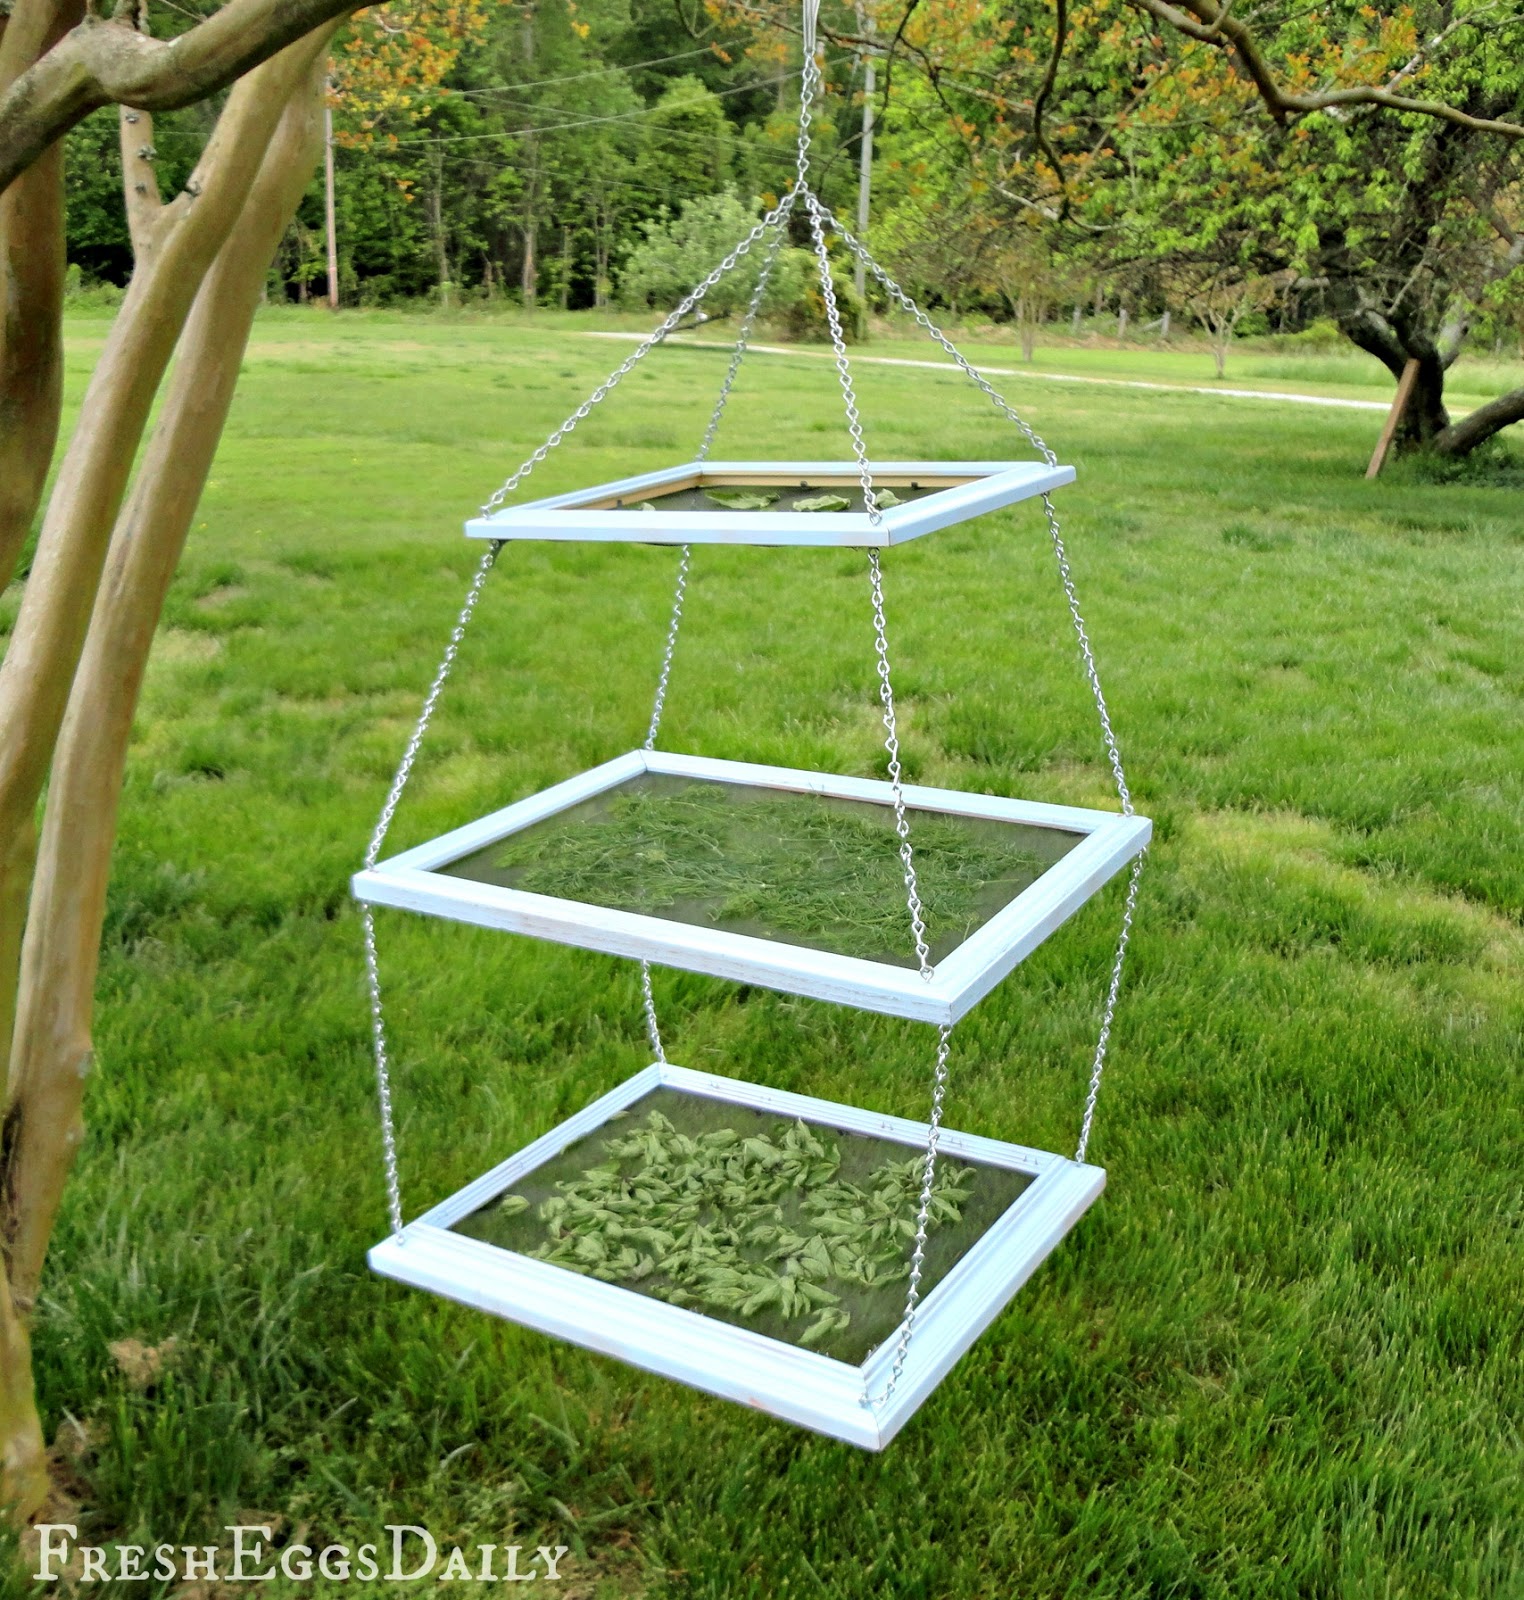 How to Make an Inexpensive Herb-Drying Rack